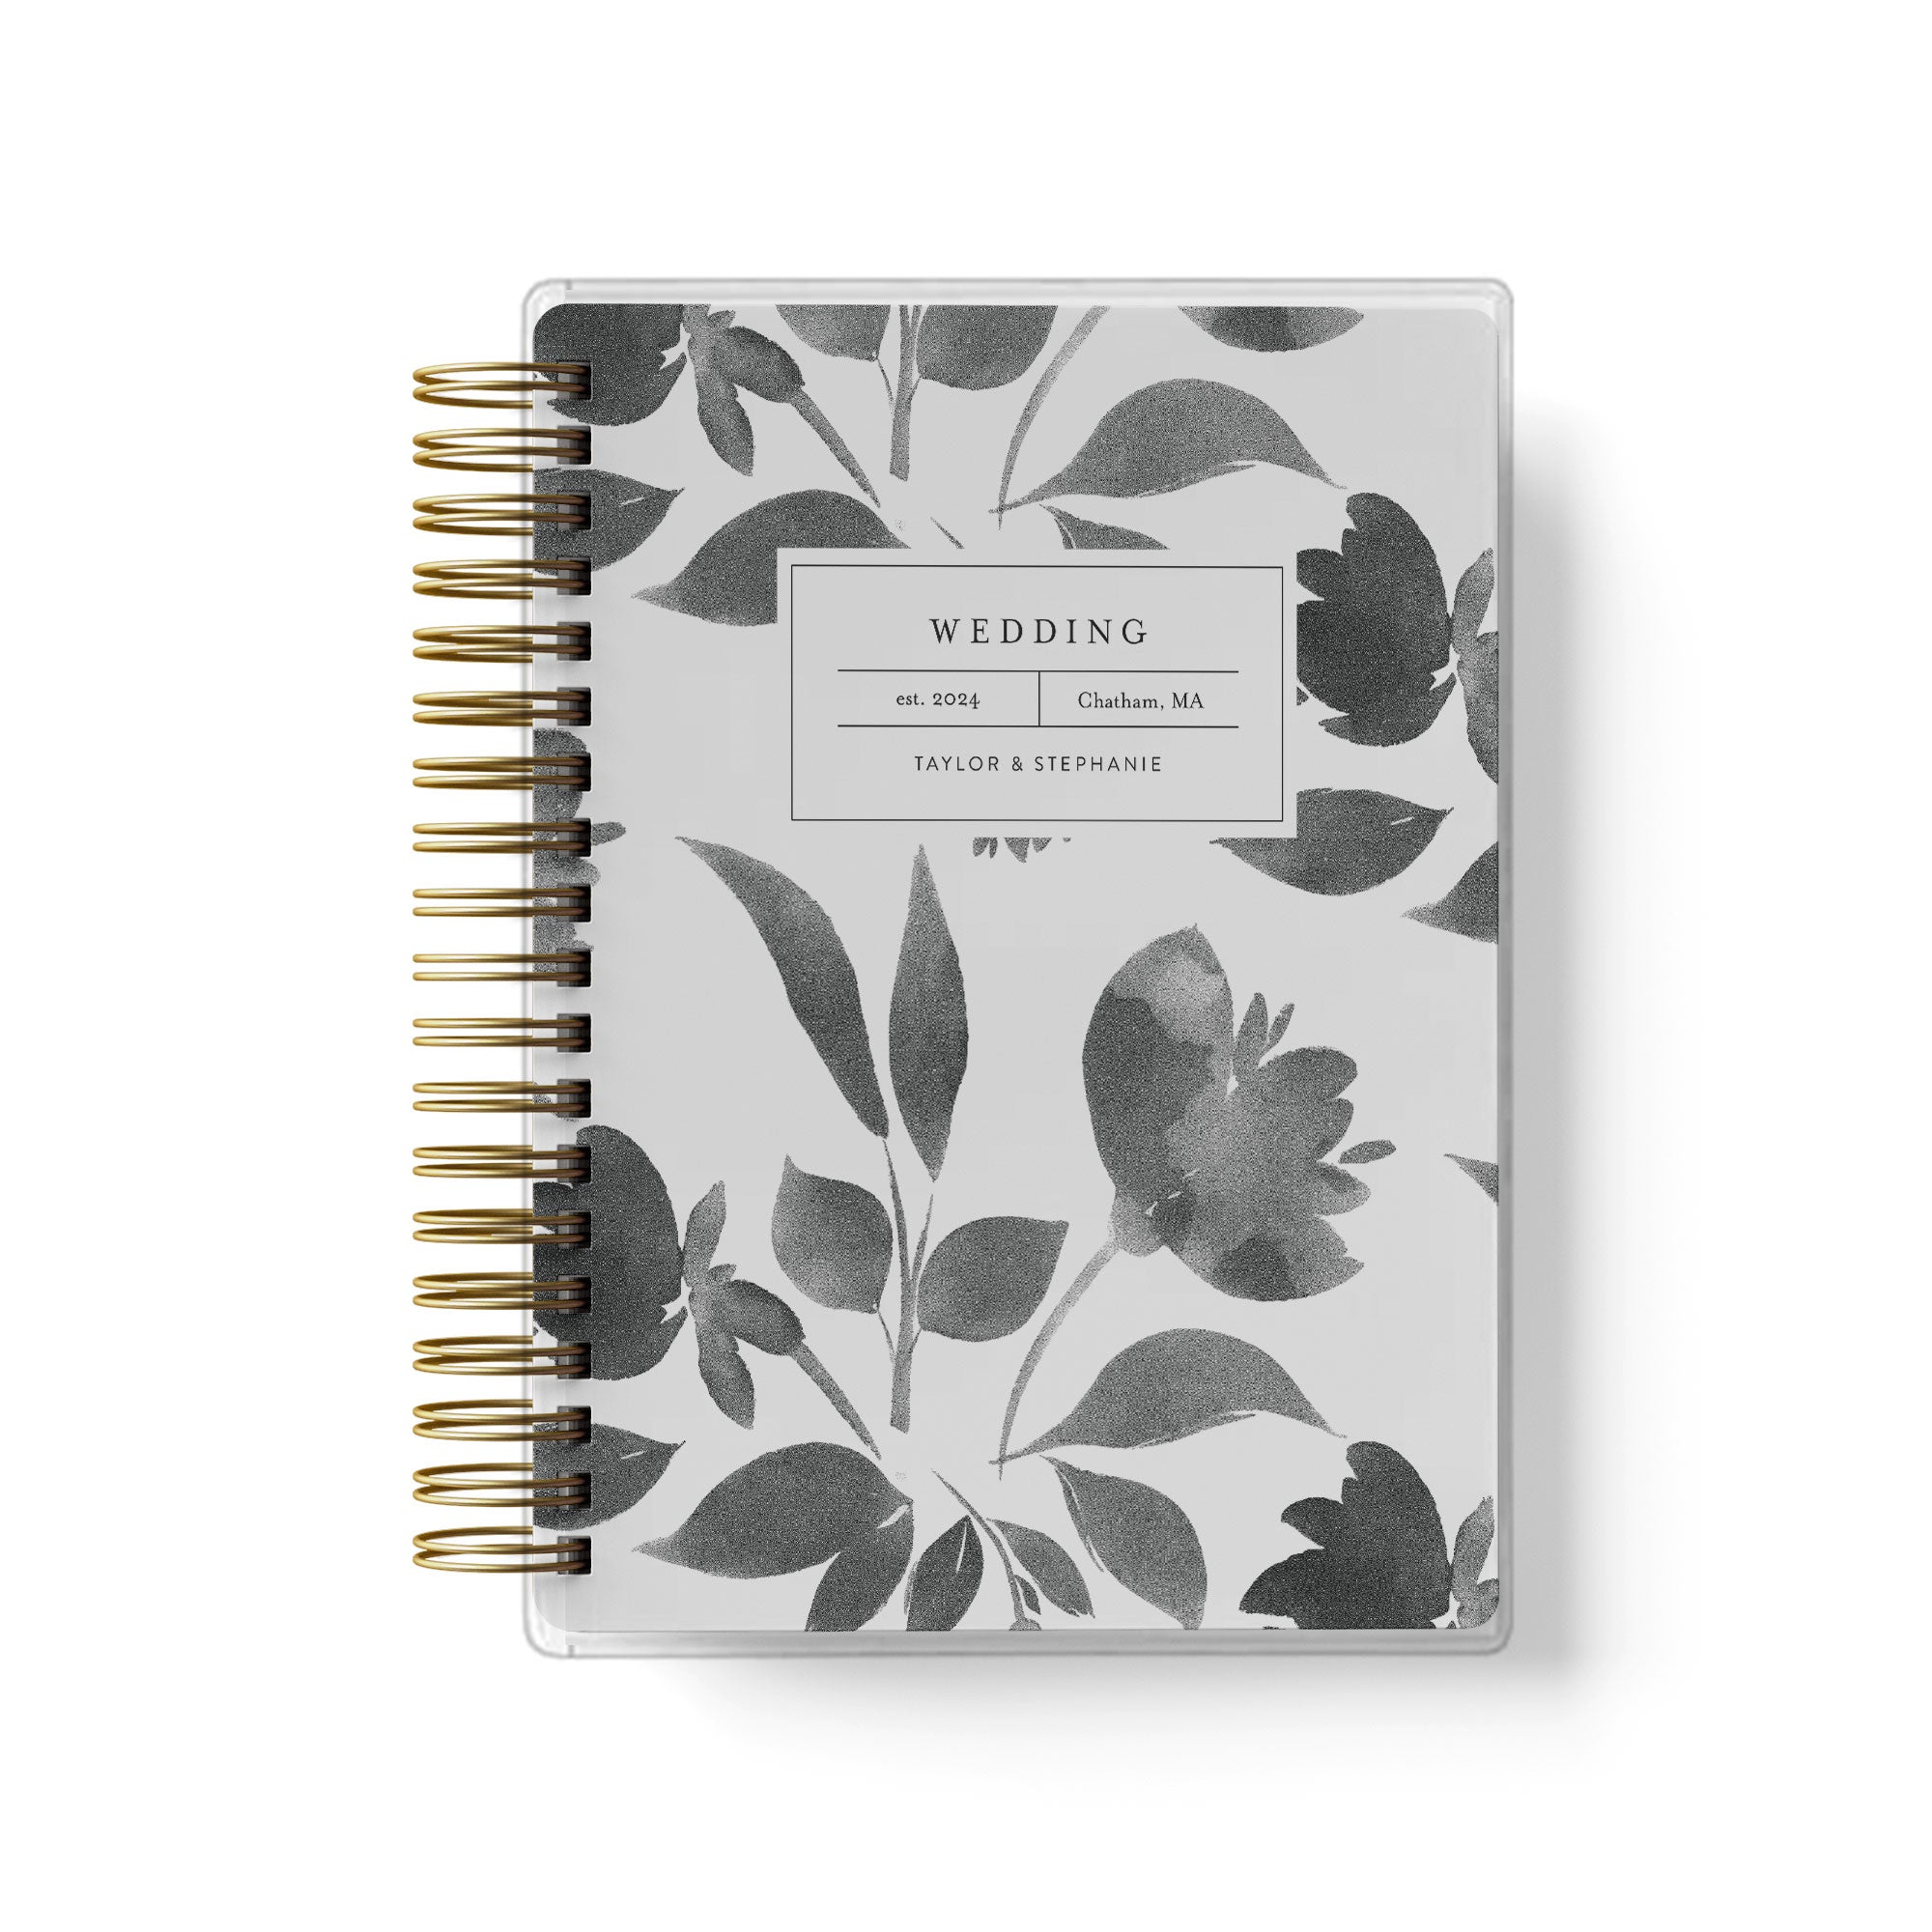 A soft cover version of our popular Wicked Bride planner is perfect for budget conscious brides